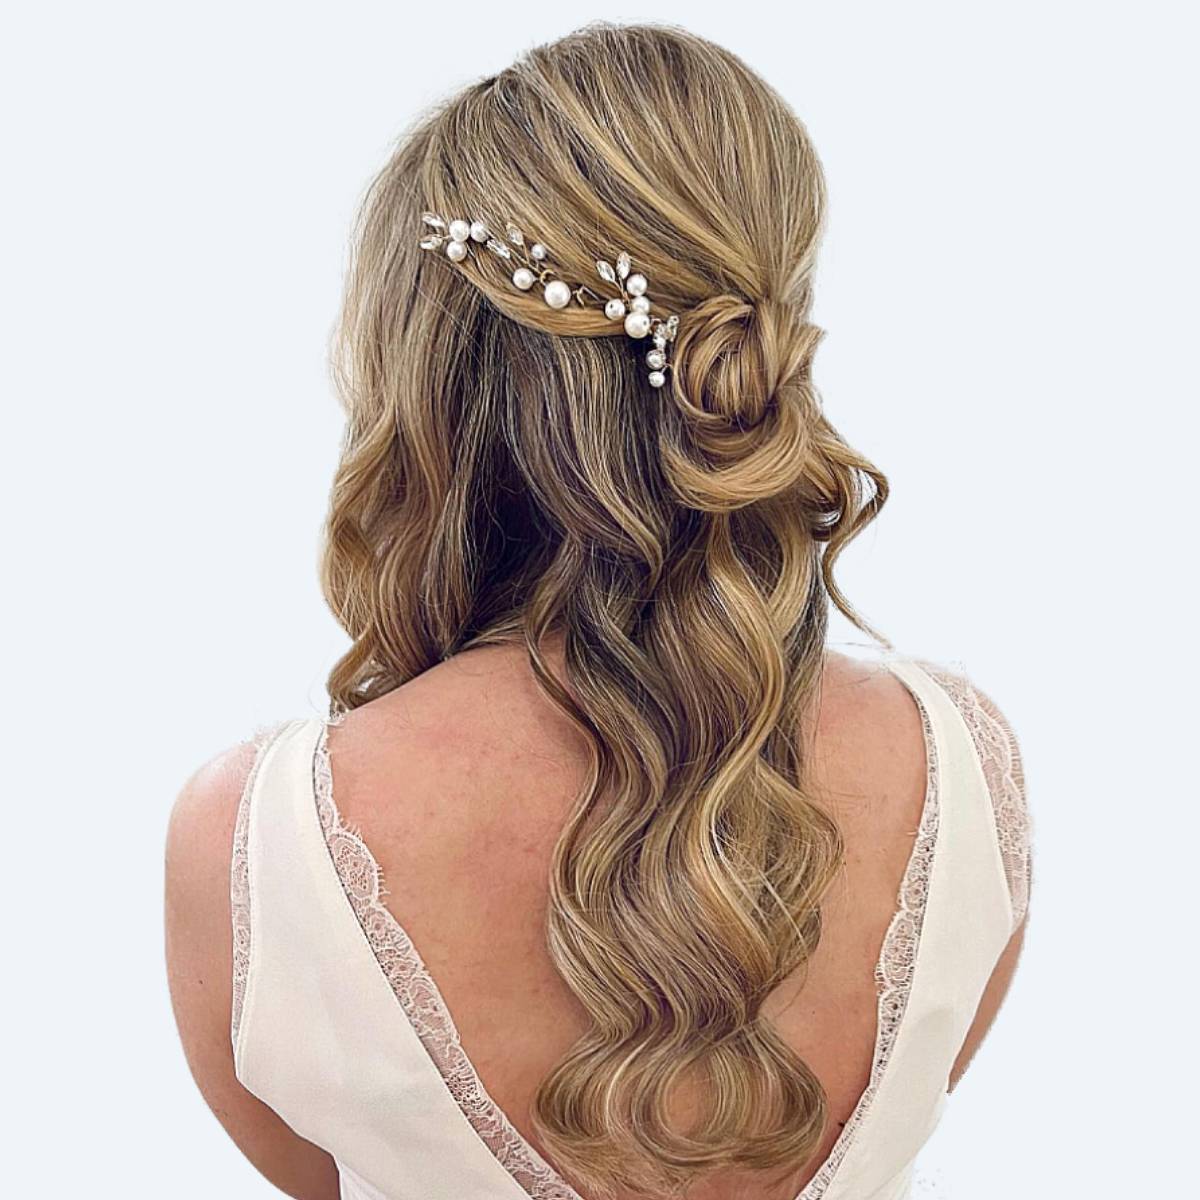 12 Cute Spring Formal Hairstyles For Short Hair - Society19 | Formal  hairstyles for short hair, Medium length hair styles, Everyday hairstyles